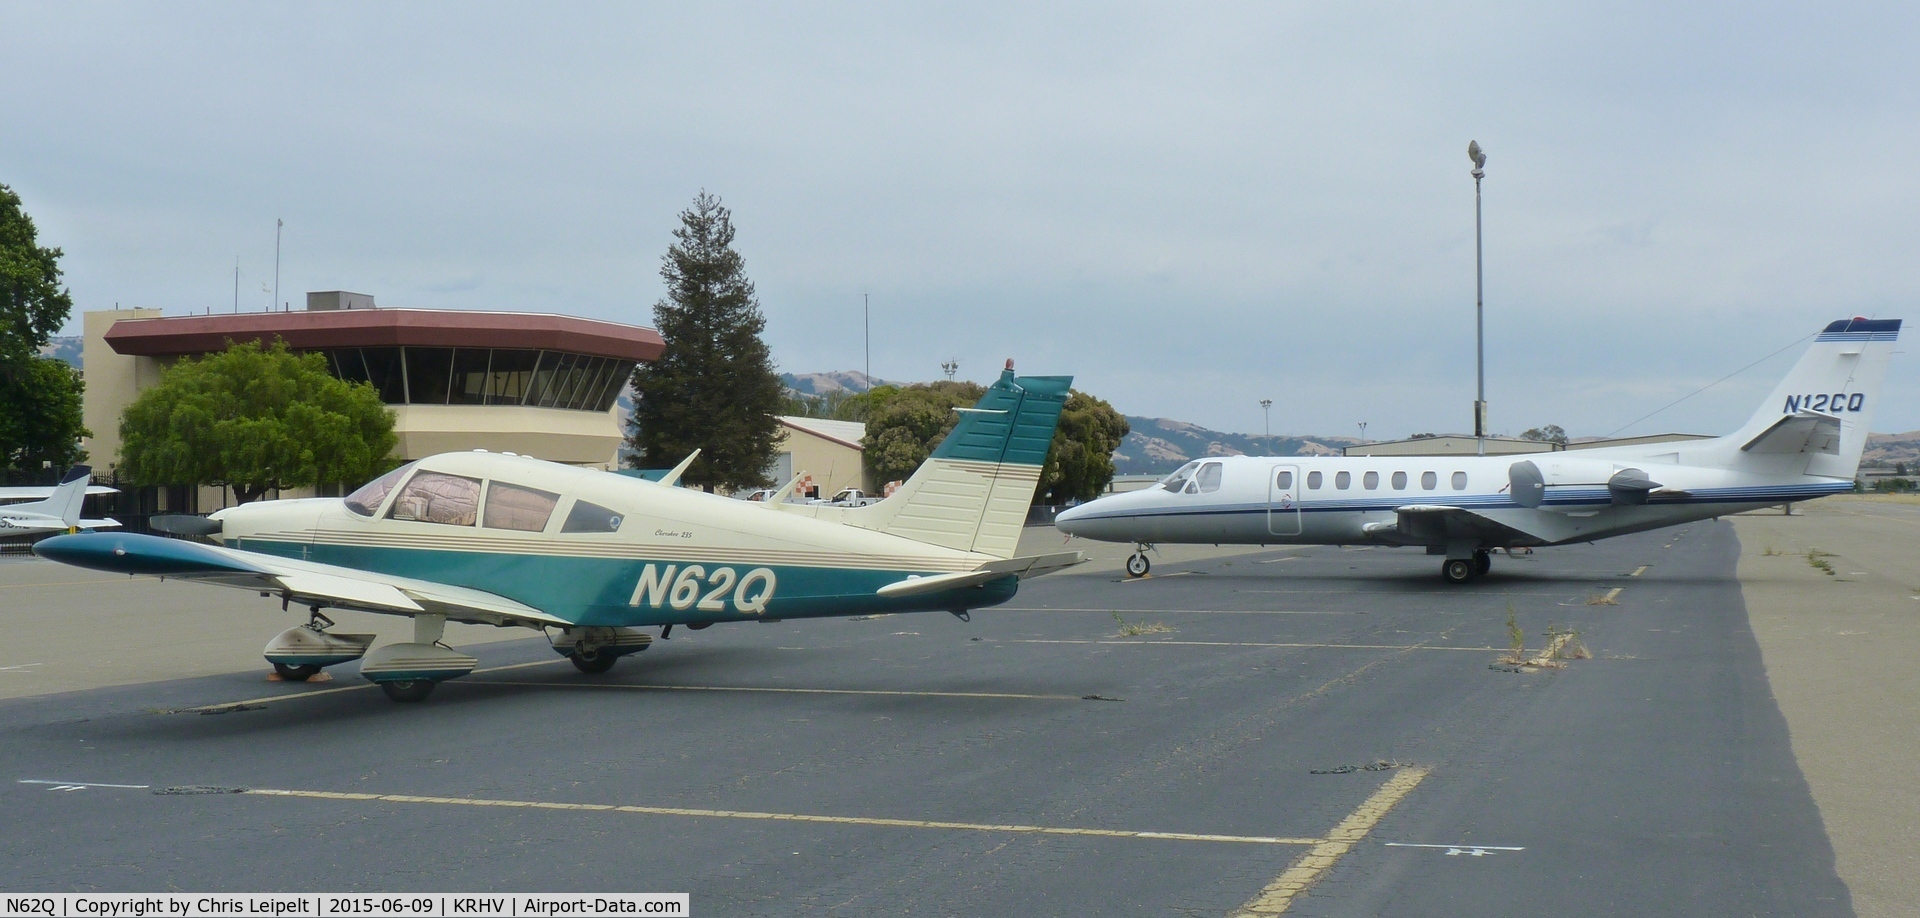 N62Q, 1972 Piper PA-28-235 Cherokee C/N 28-7210011, A transient 1972 Piper Cherokee (LAFAYETTE, CA) visiting Reid Hillview Airport, CA. The Citation Ultra next to it makes the Piper look very very small!